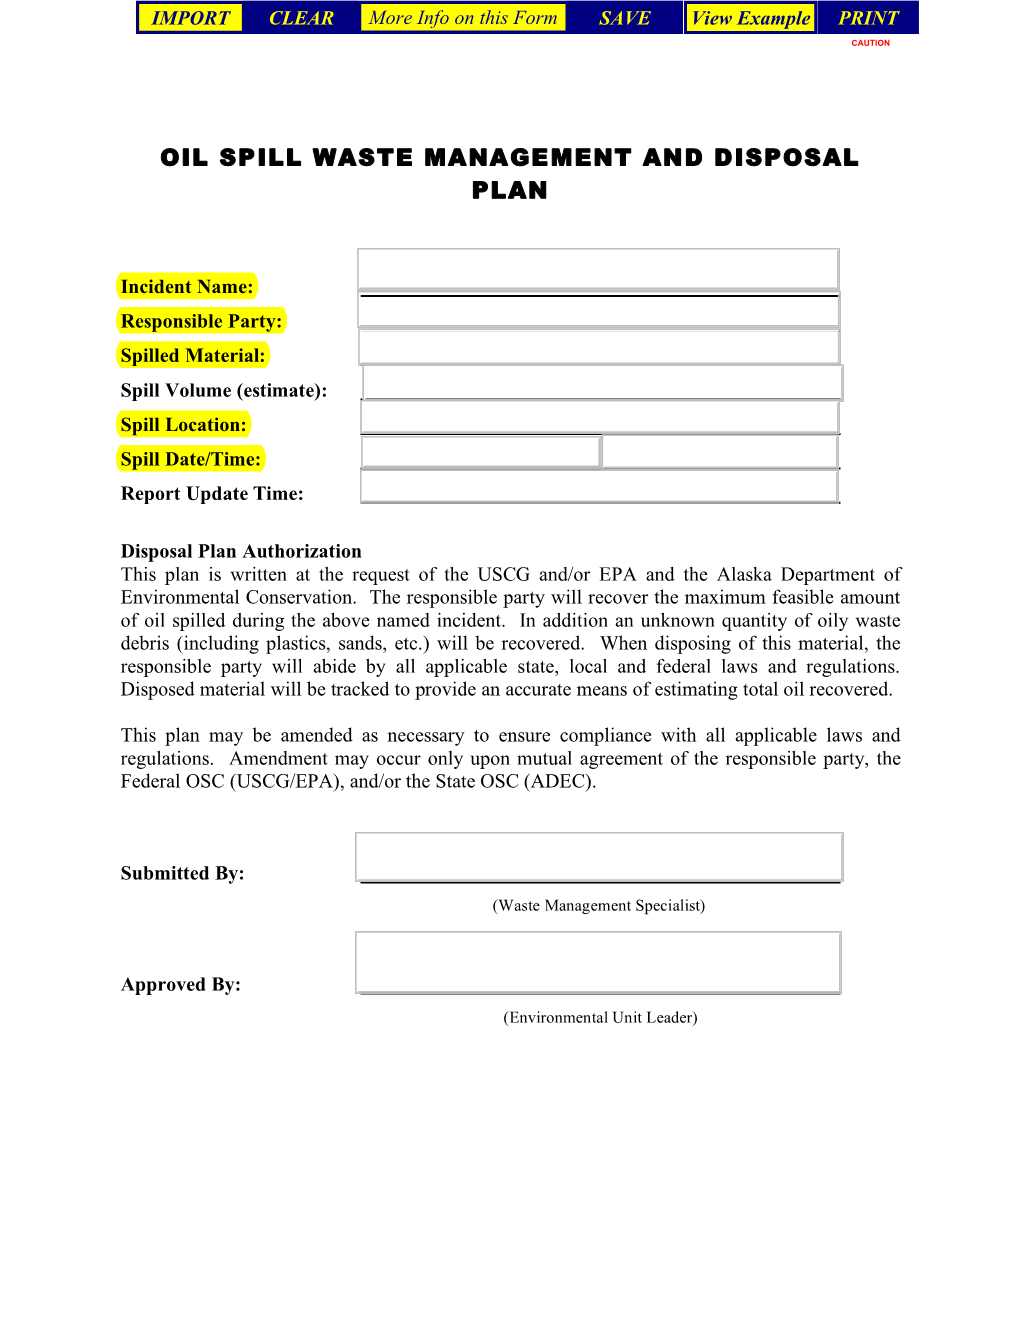 Oil Spill Waste Management and Disposal Plan